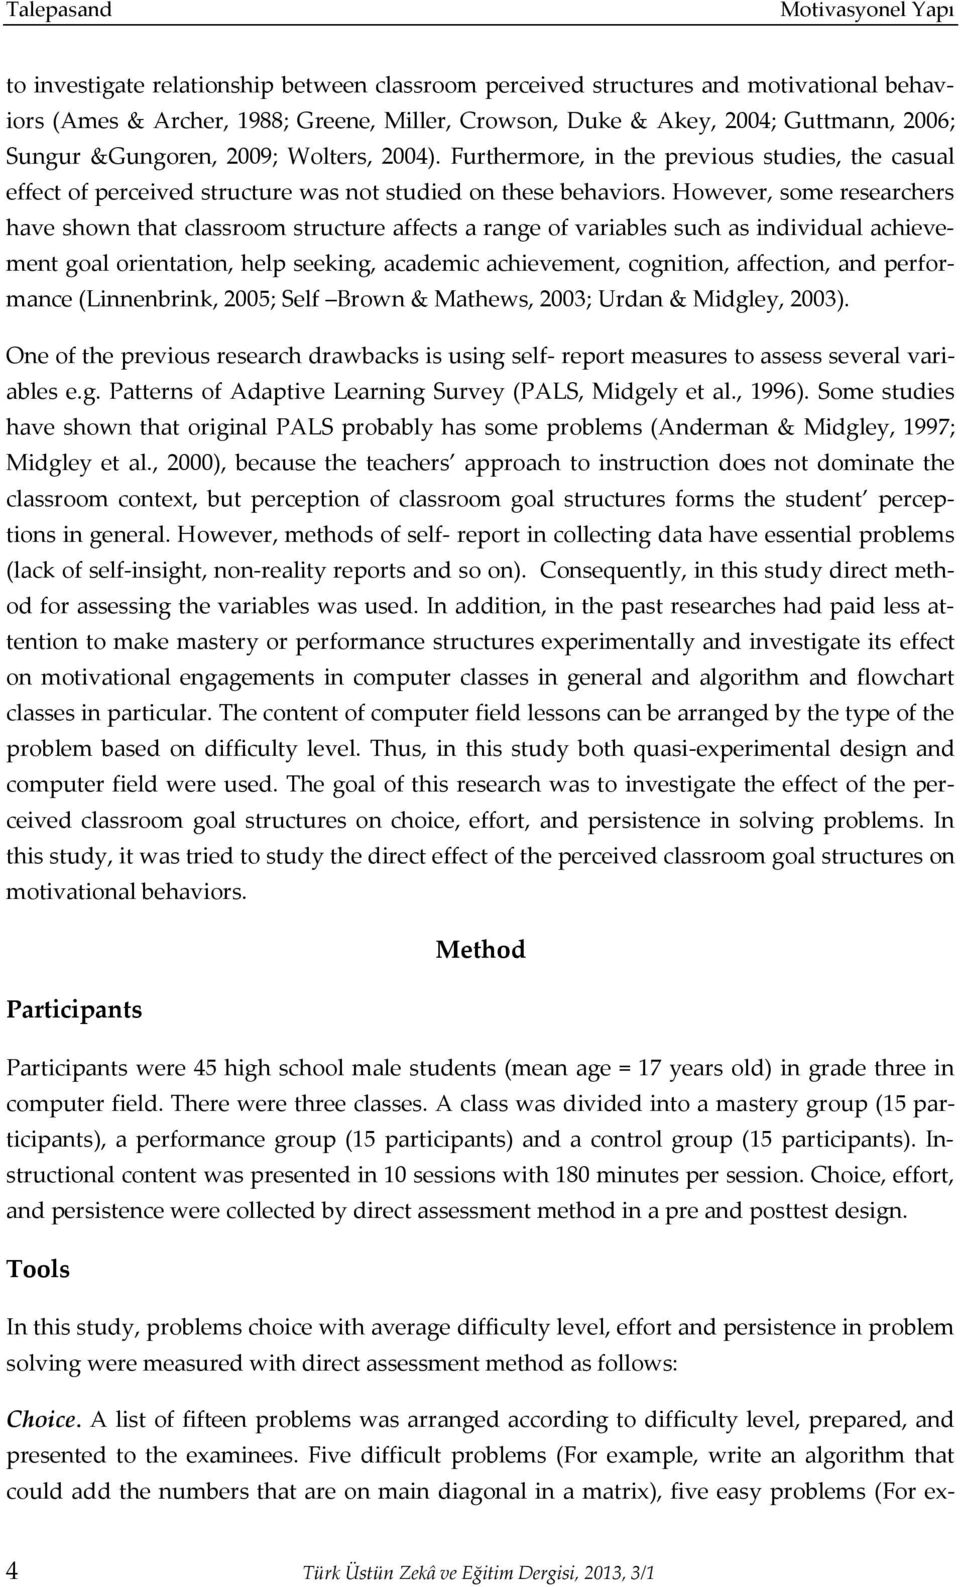 However, some researchers have shown that classroom structure affects a range of variables such as individual achievement goal orientation, help seeking, academic achievement, cognition, affection,